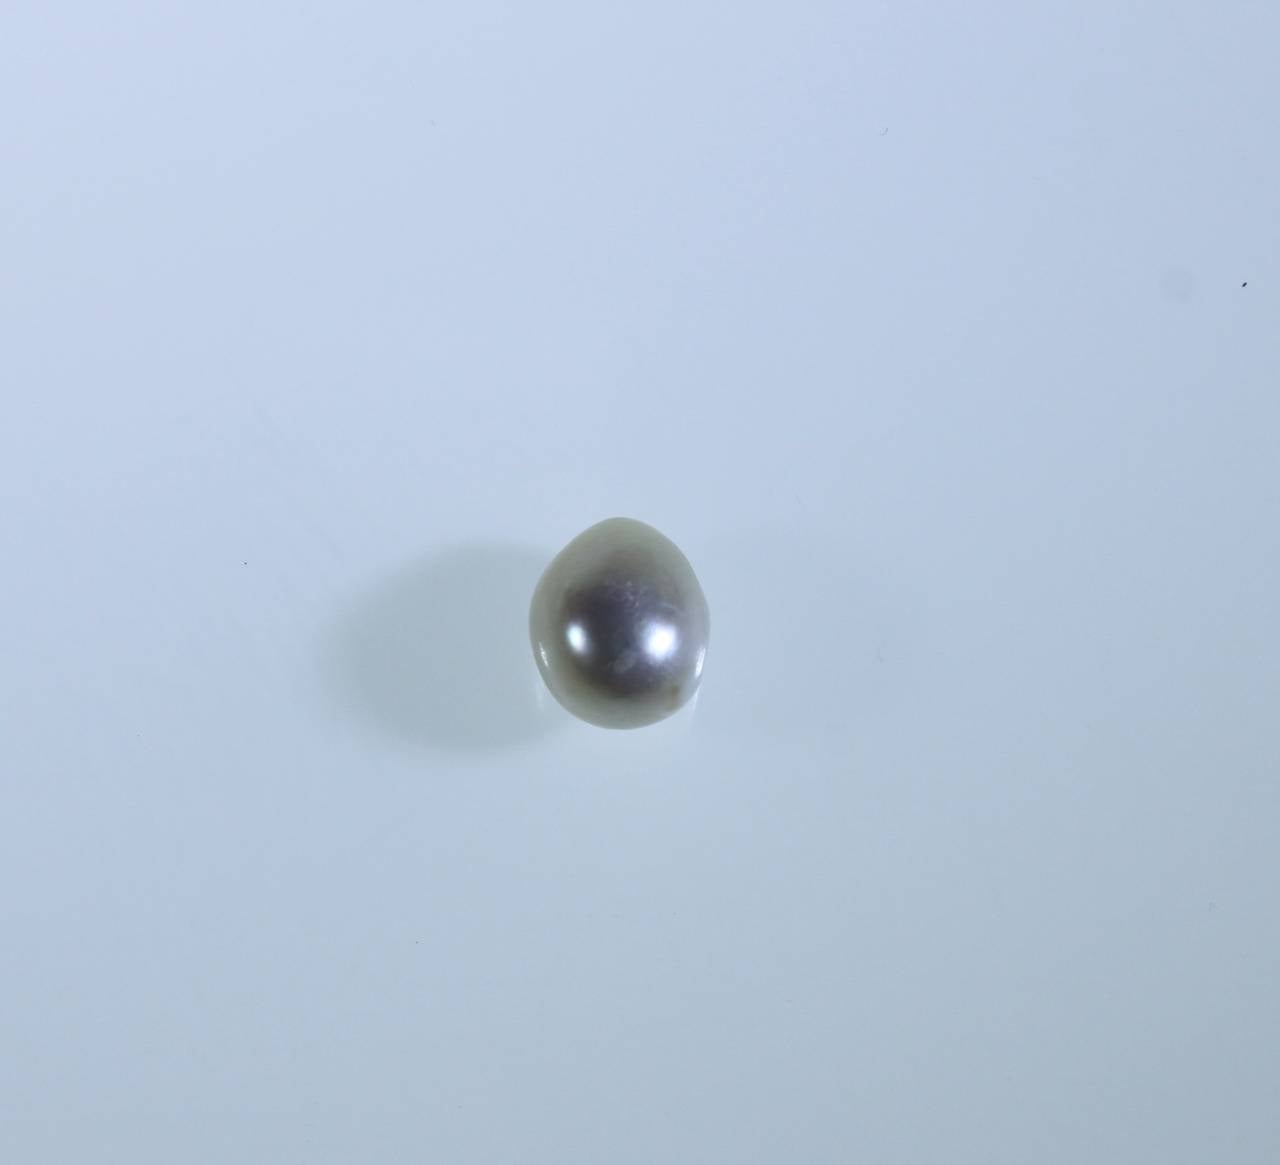 Natural Pearl Drop Unmounted GIA Certified as Natural Pearl
Size: 10.24 x 8.44
Weight: 4.42 carats 
Partially Drilled
Natural Pearls are Rare and prices are escalating.

Was in a Tie pin that was in the Nizam of Hyderabad Collection acquired